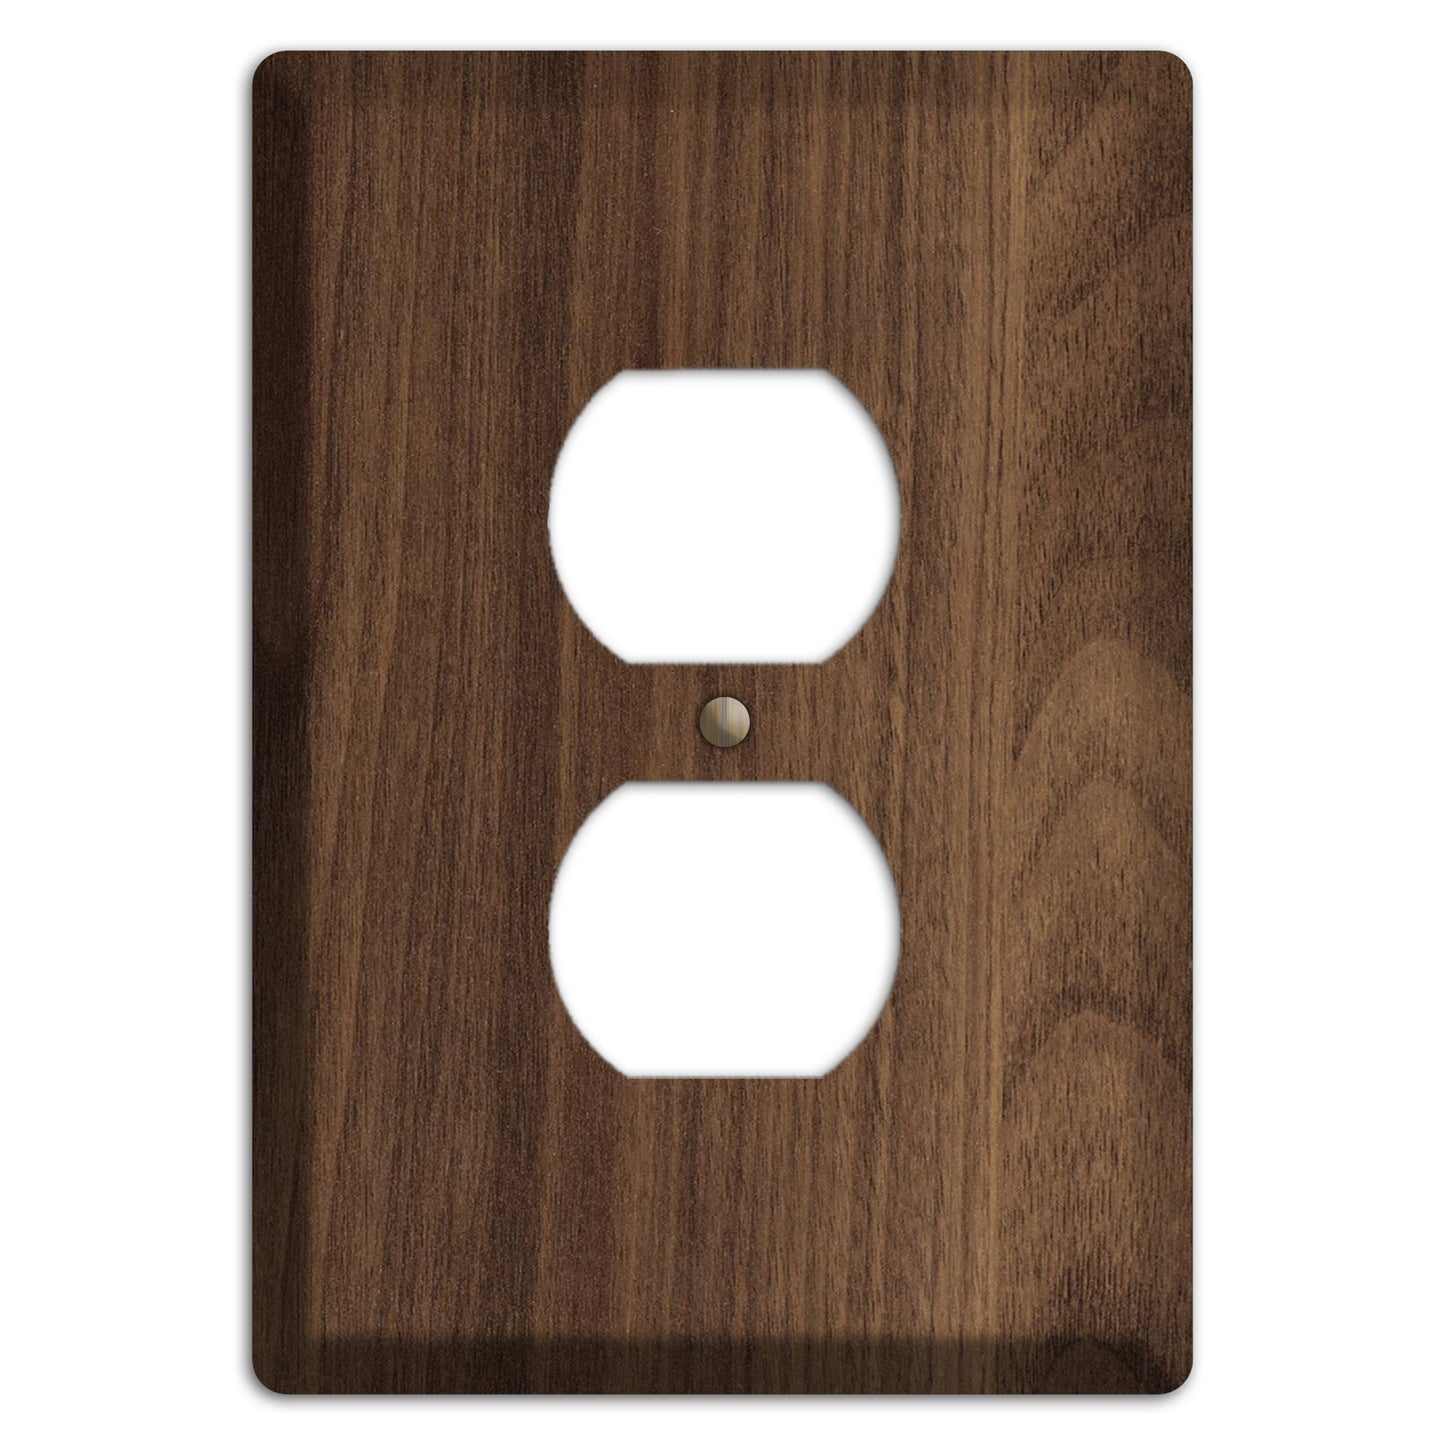 Unfinished Walnut Wood Duplex Outlet Cover Plate